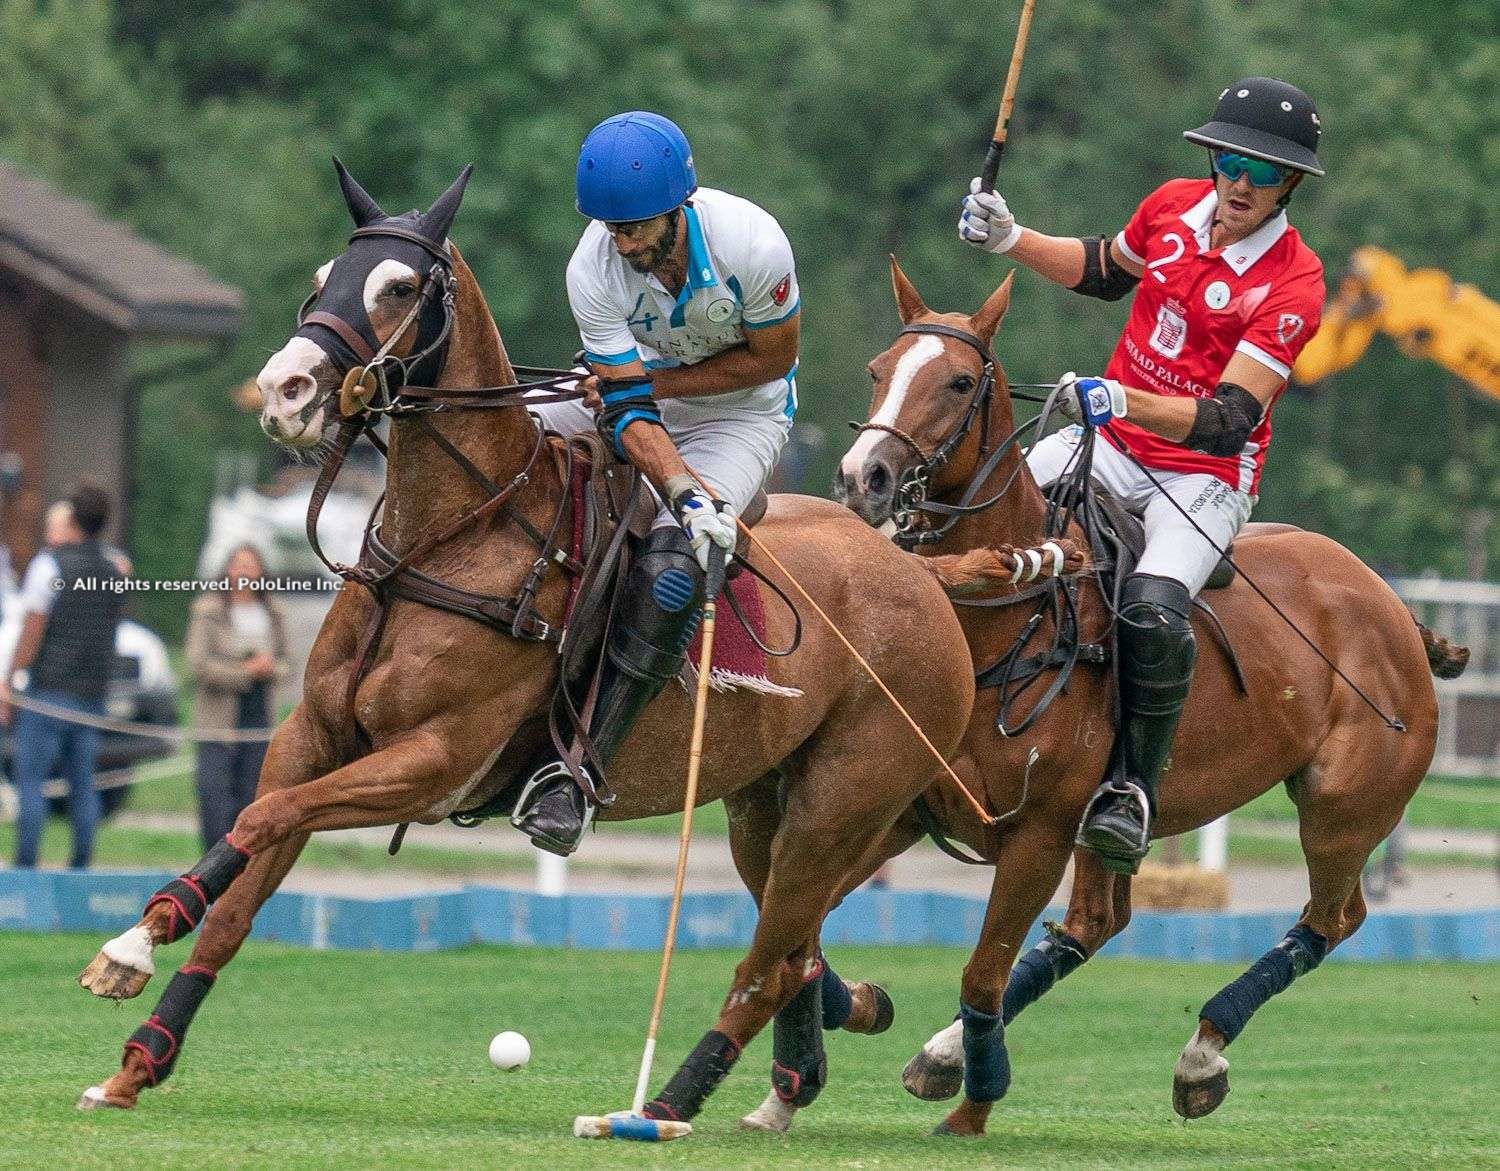 Hublot Polo Gold Cup Gstaad, Day 1